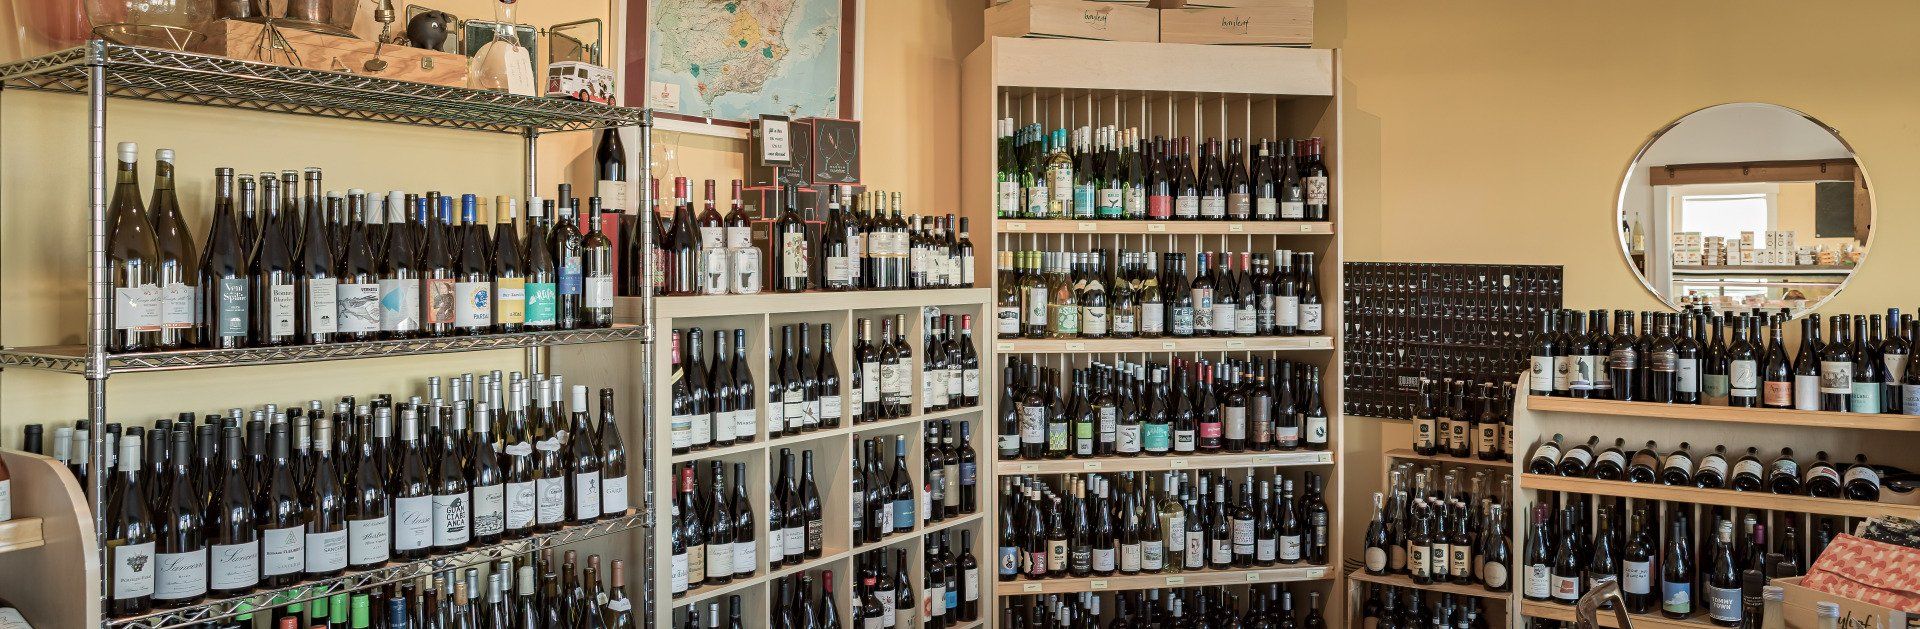 a store filled with lots of bottles of wine on shelves .